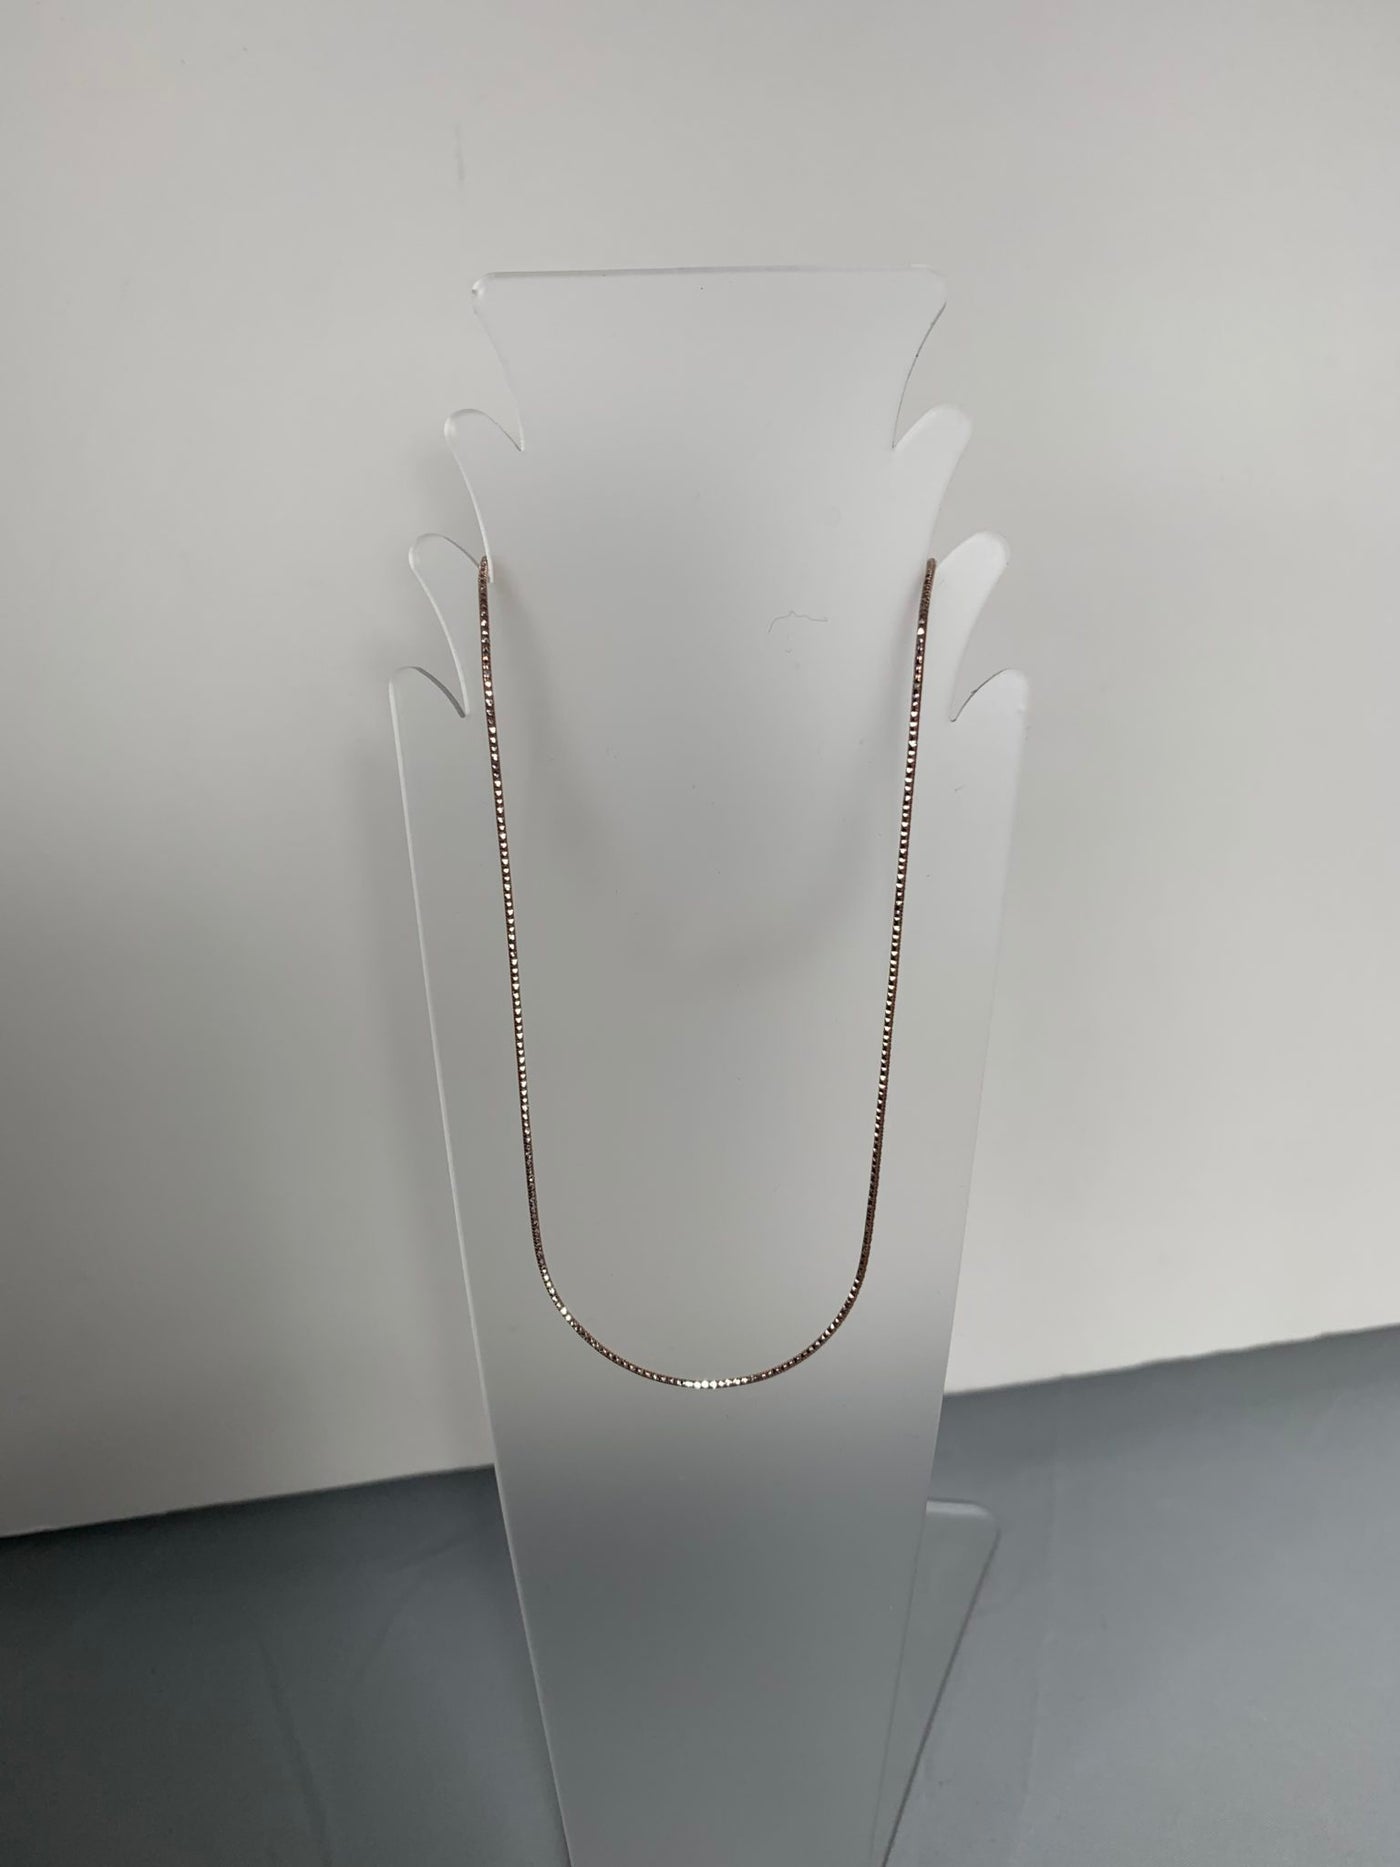 2-tone Sterling Silver Snake Chain with Rose Gold Tone Coating, 16"